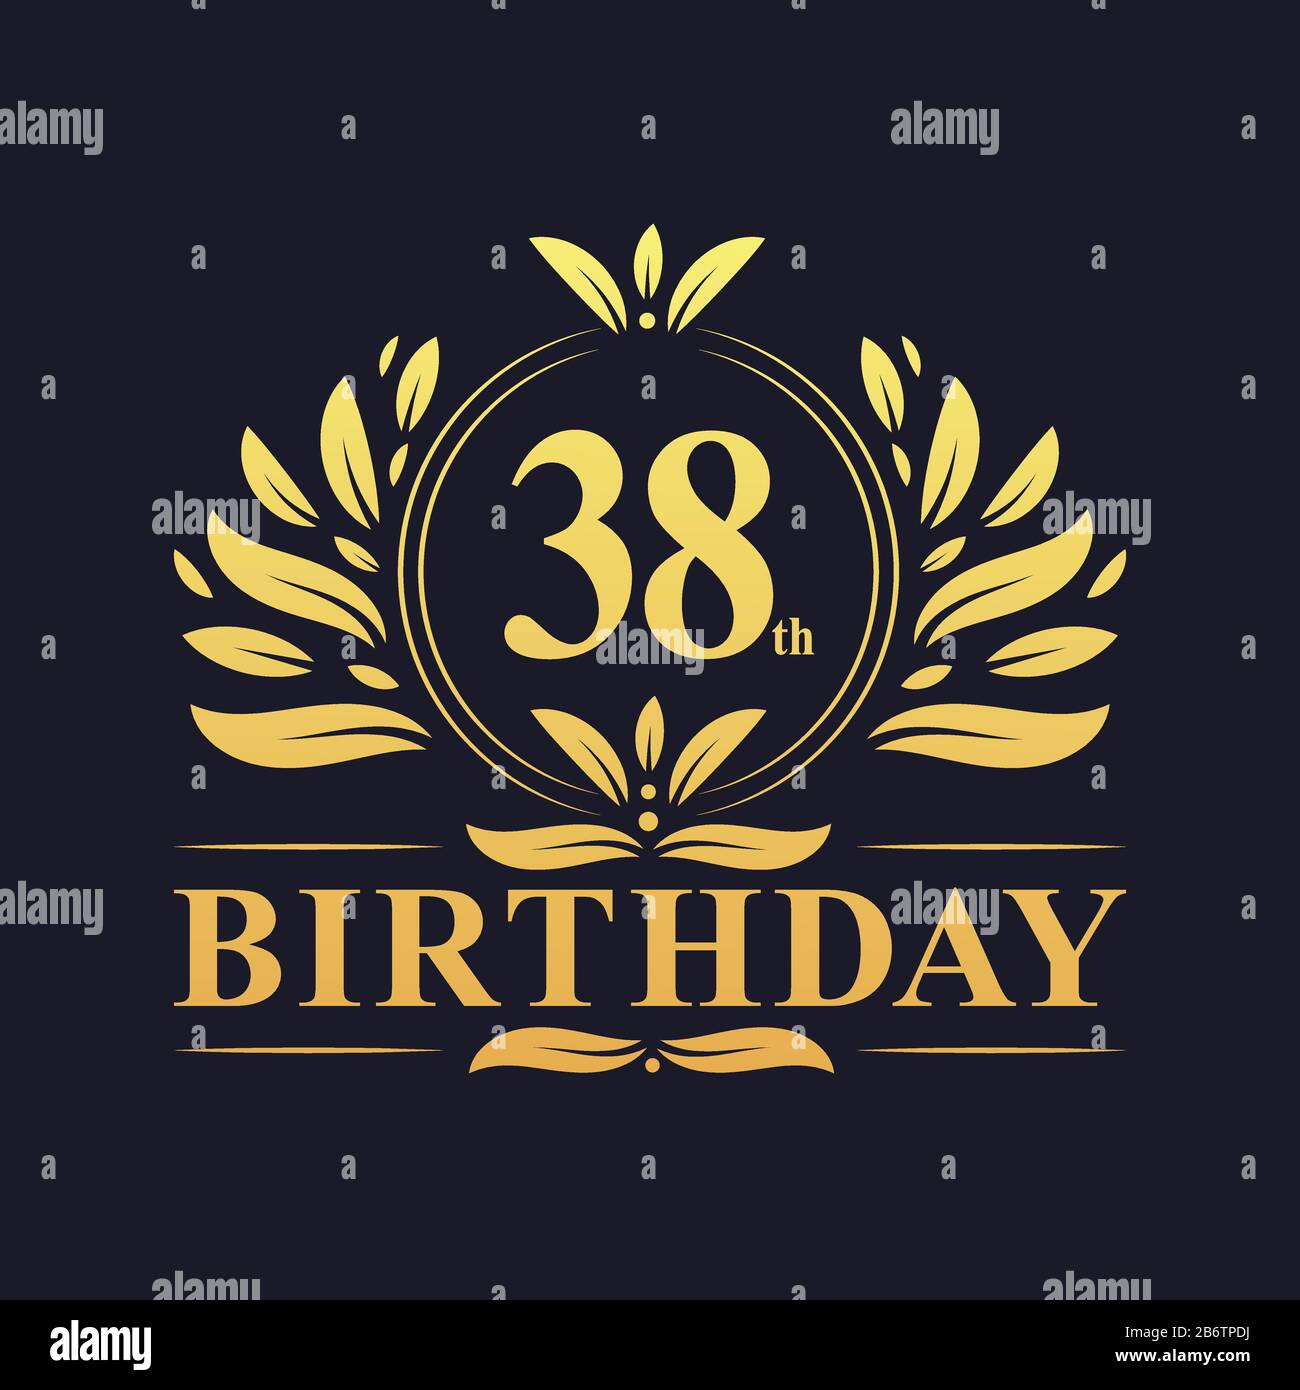 38th Birthday Design Luxurious Golden Color 38 Years Birthday Celebration Stock Vector Image